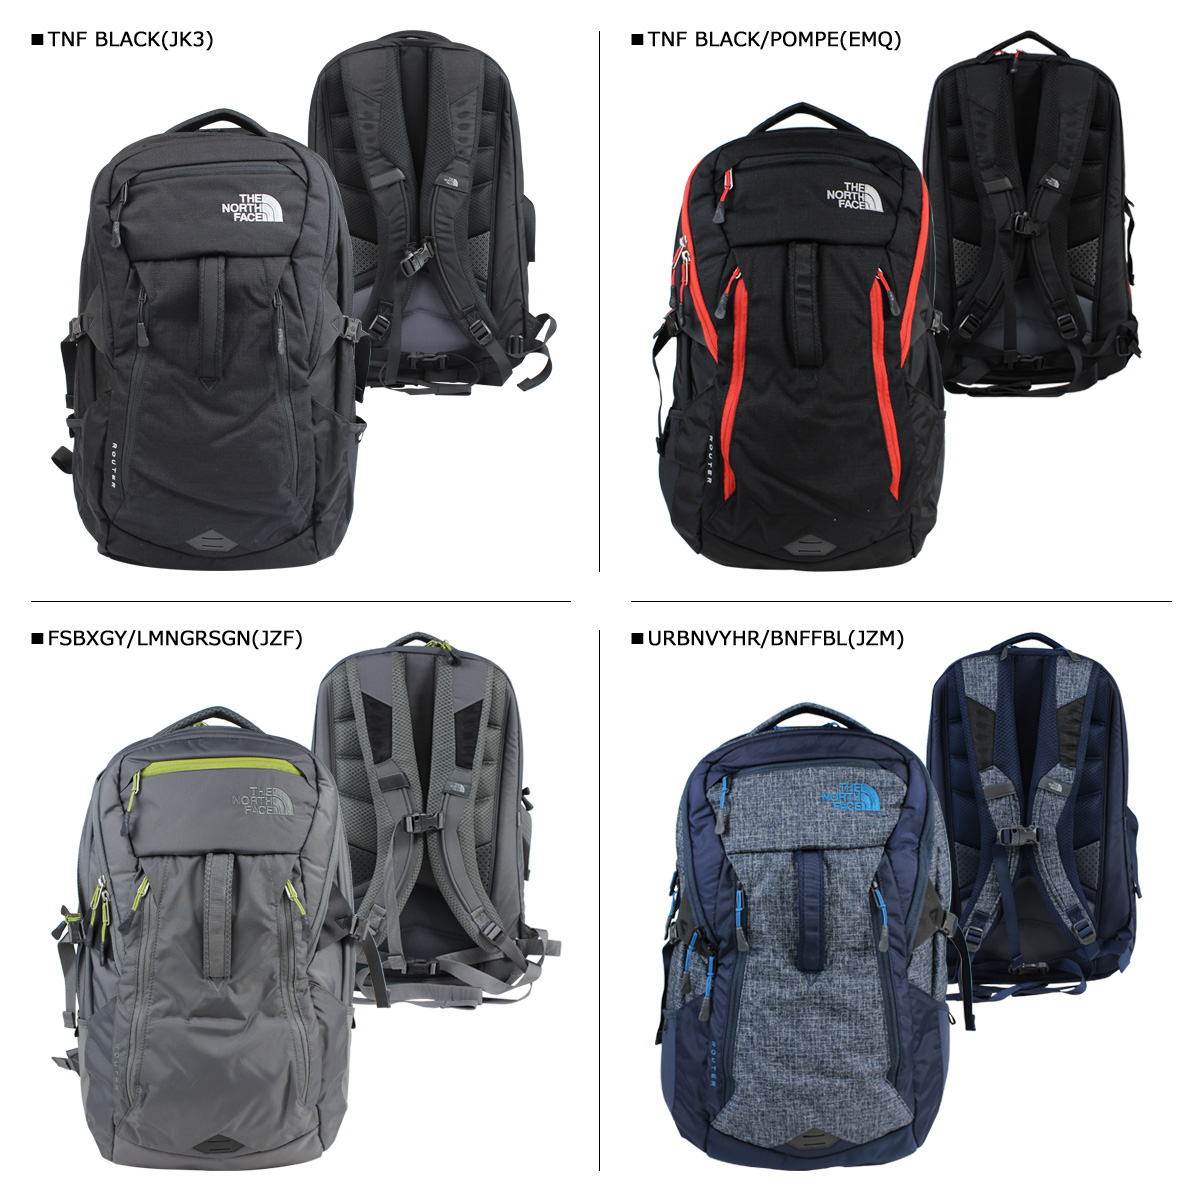 the north face 35l backpack